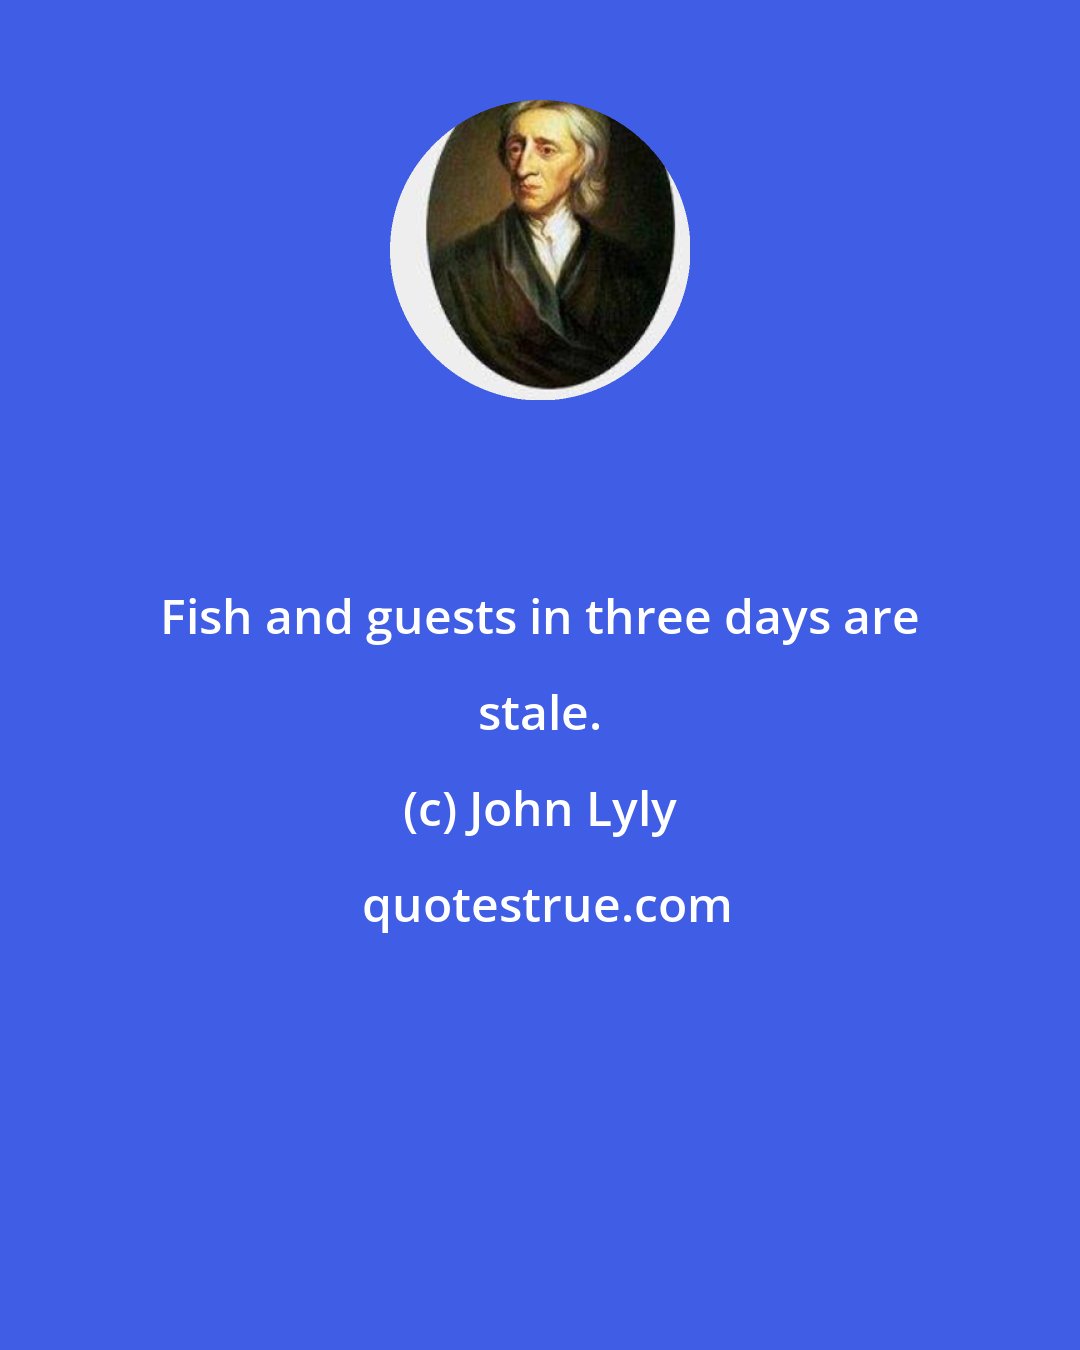 John Lyly: Fish and guests in three days are stale.